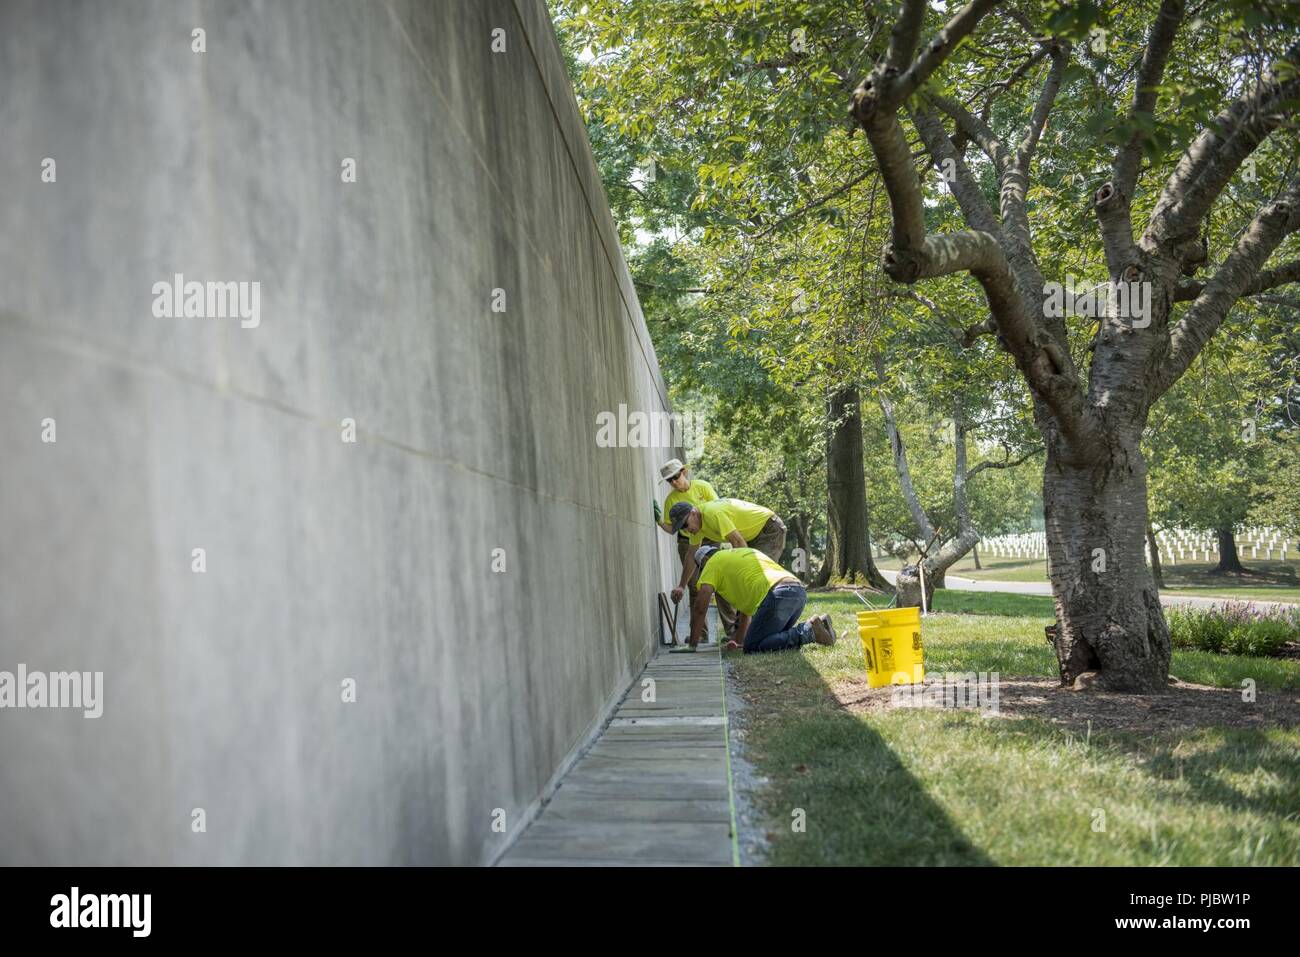 Volunteers straighten, level and replace broken stones outside of Columbarium Court 1 at Arlington National Cemetery, Arlington, Virginia, July 16, 2018. Over 400 volunteer landscape professionals participated in the National Association of Landscape Professionals’ 22nd annual Renewal and Remembrance event at Arlington National Cemetery. Volunteers aerated turf, planted flowers, laid irrigation pipes, and installed lighting protection on several trees. Stock Photo